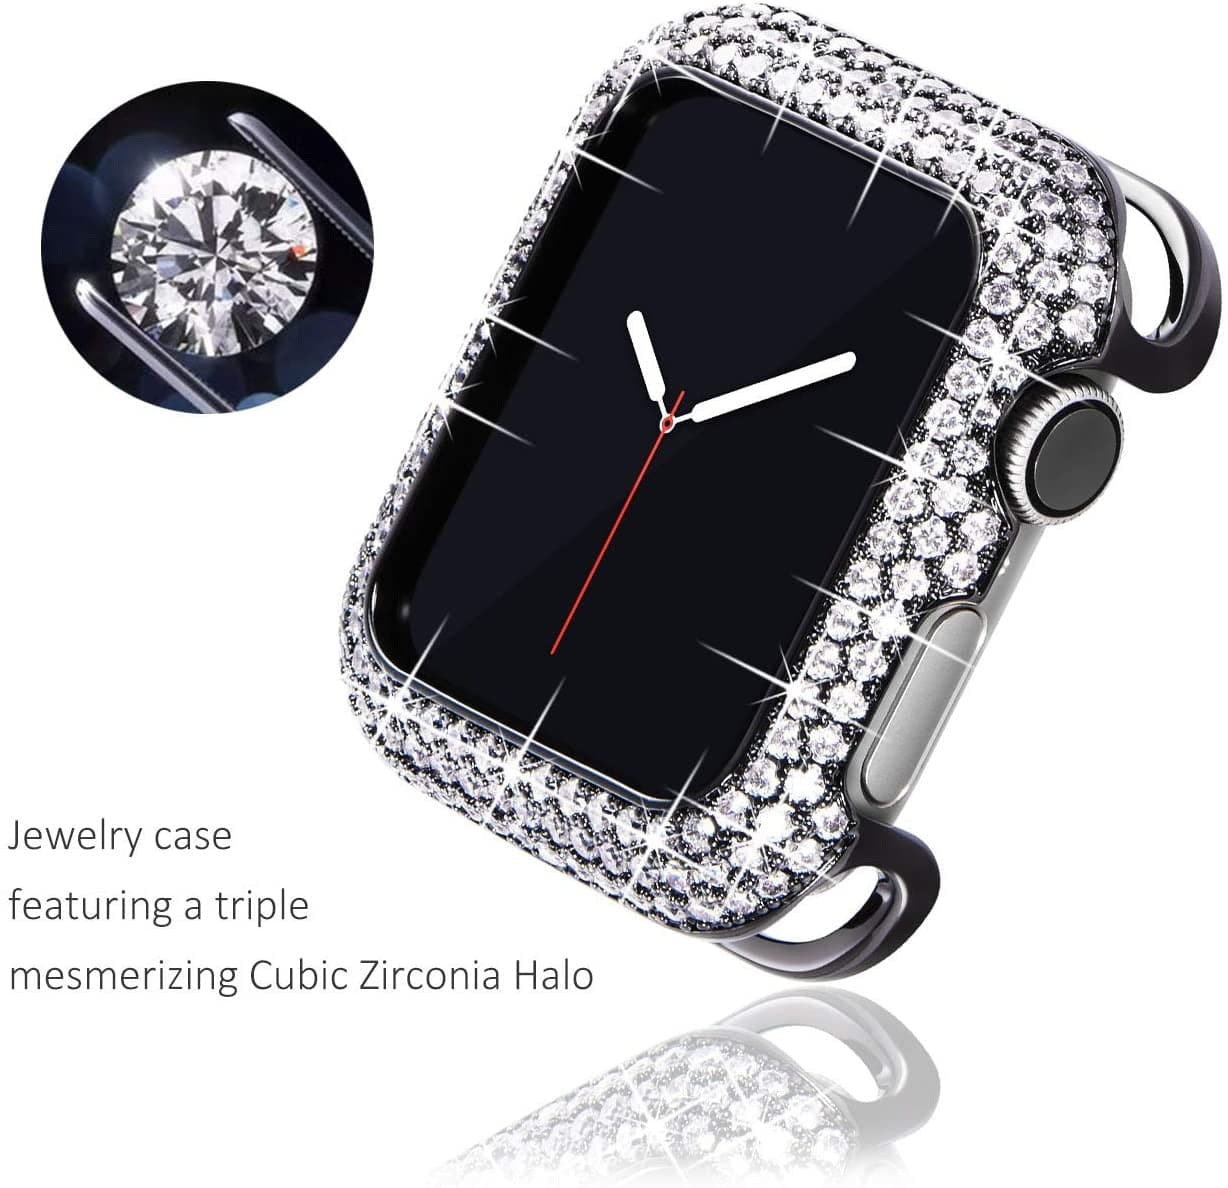 Luxe Diamond Case One Time Offer cases Scrunchapples 